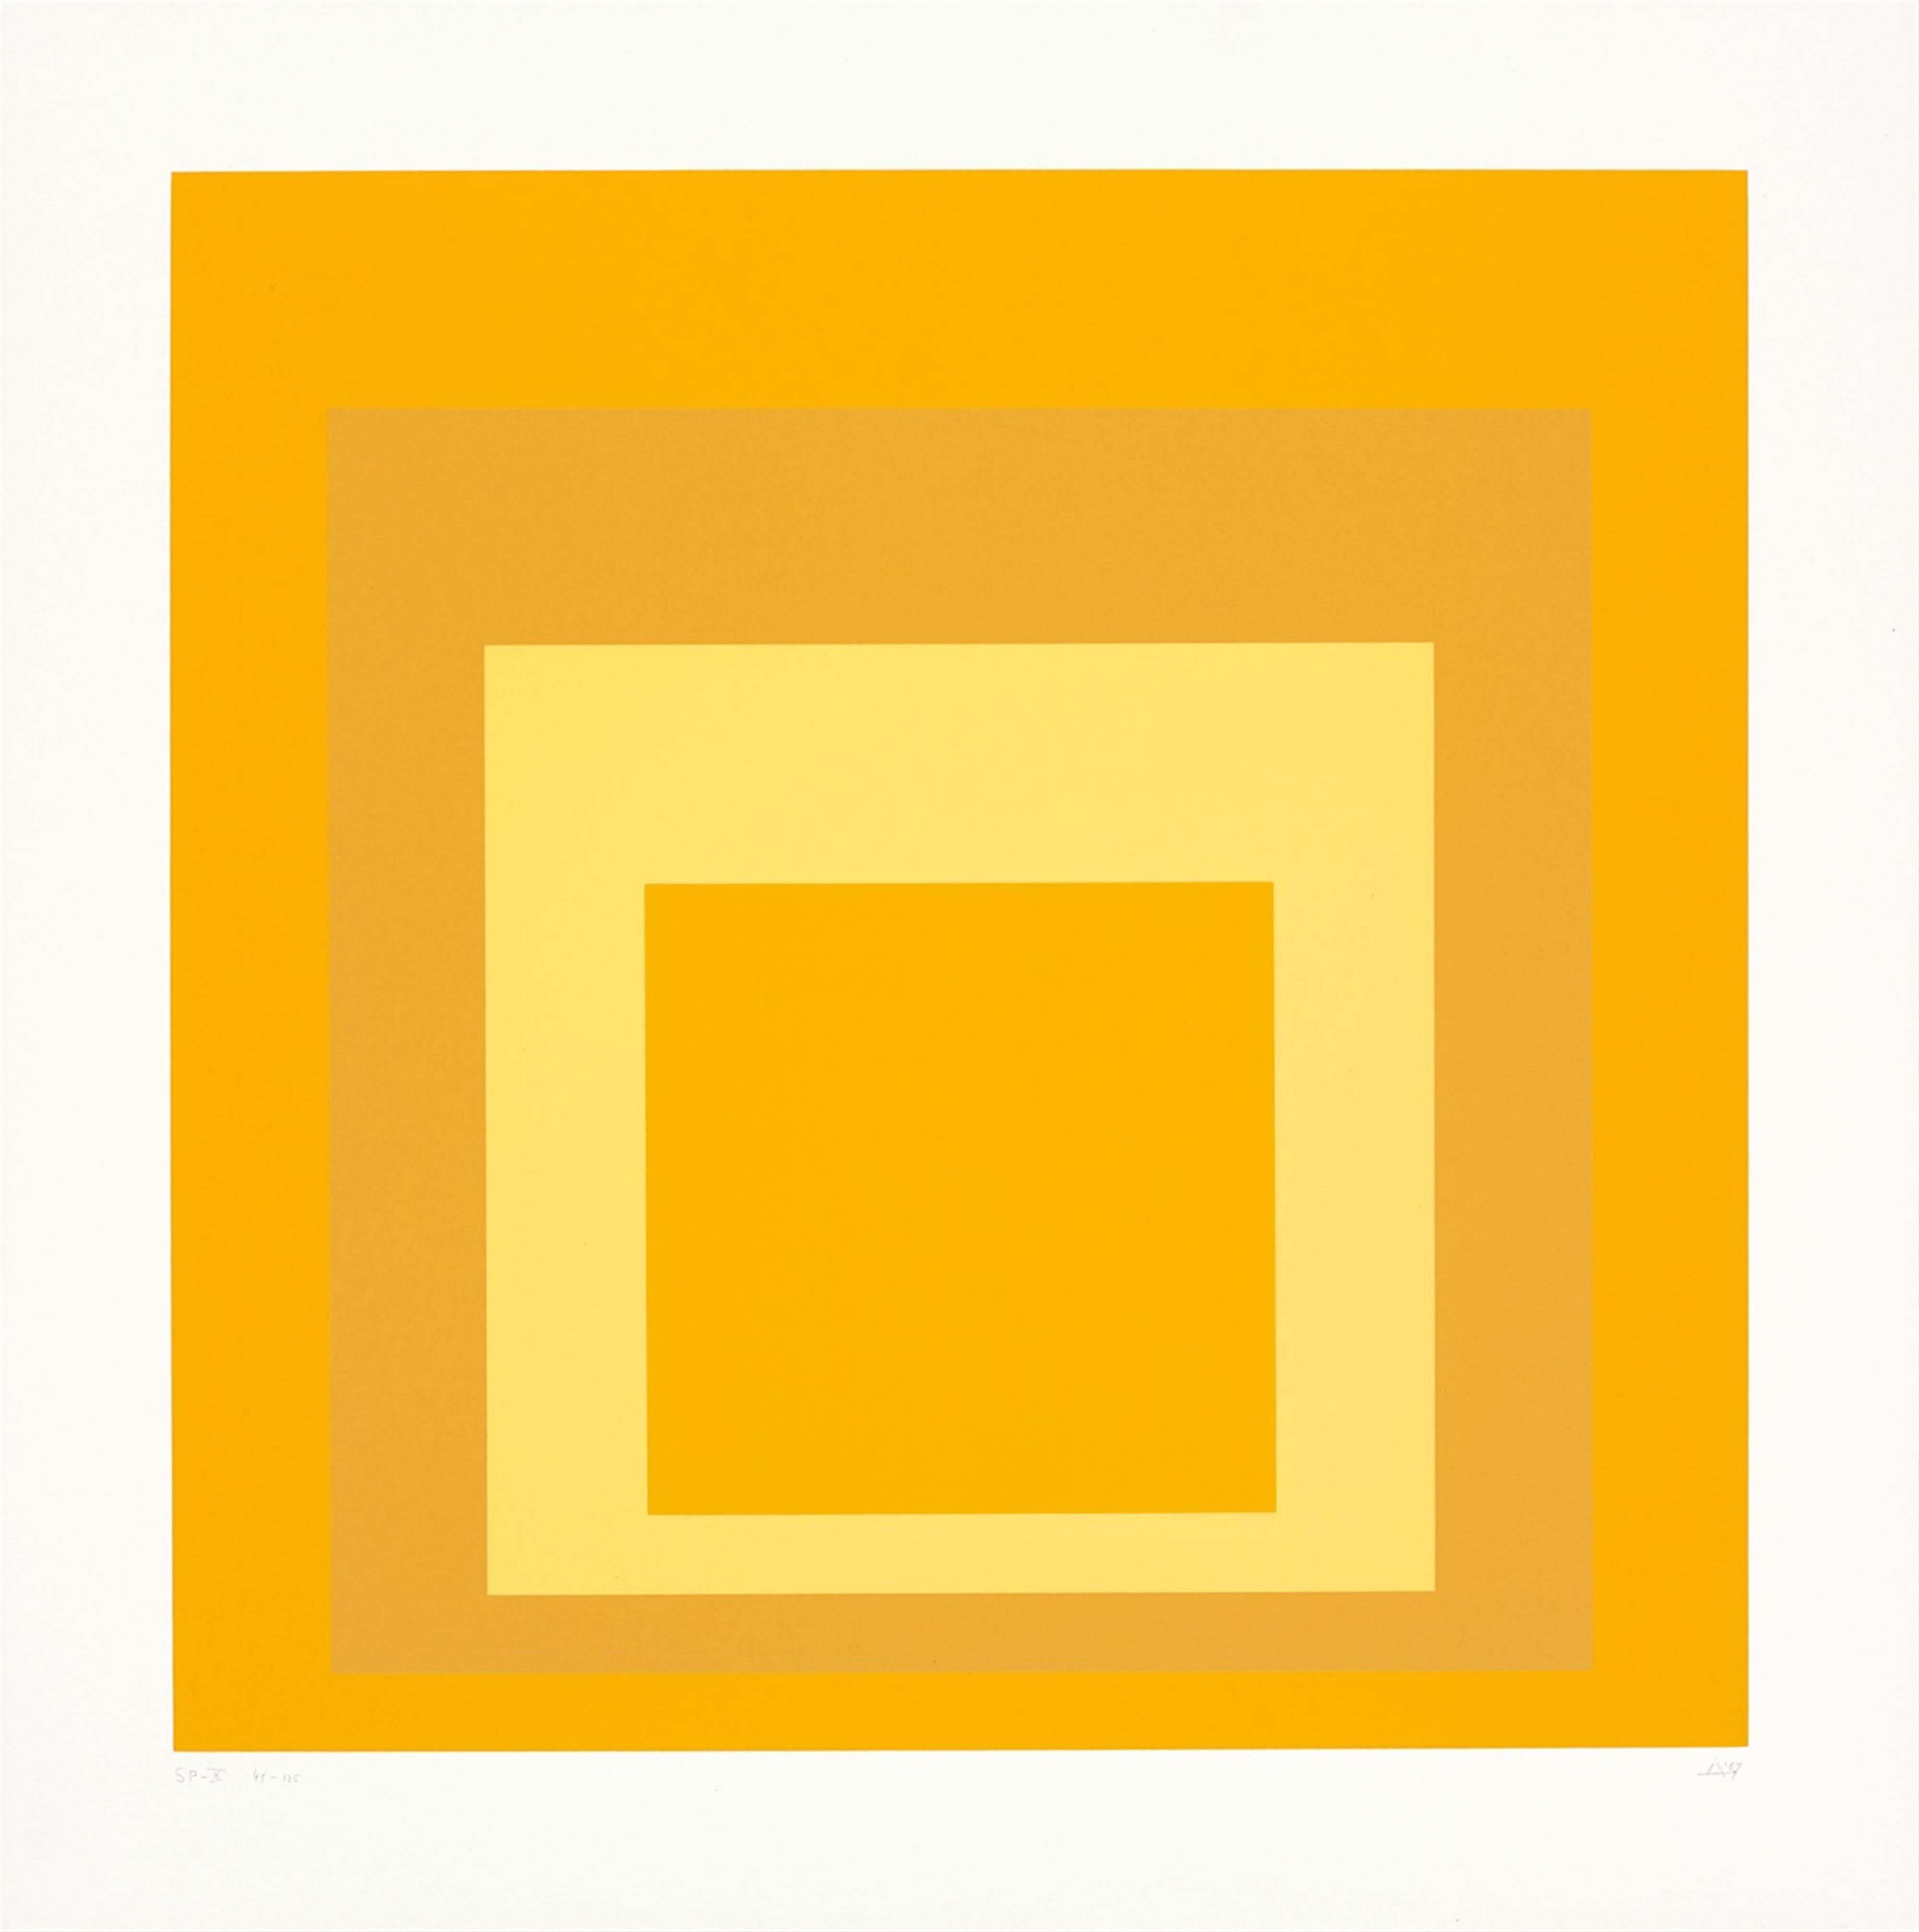 Josef Albers - SP (Homage to the Square) - image-11